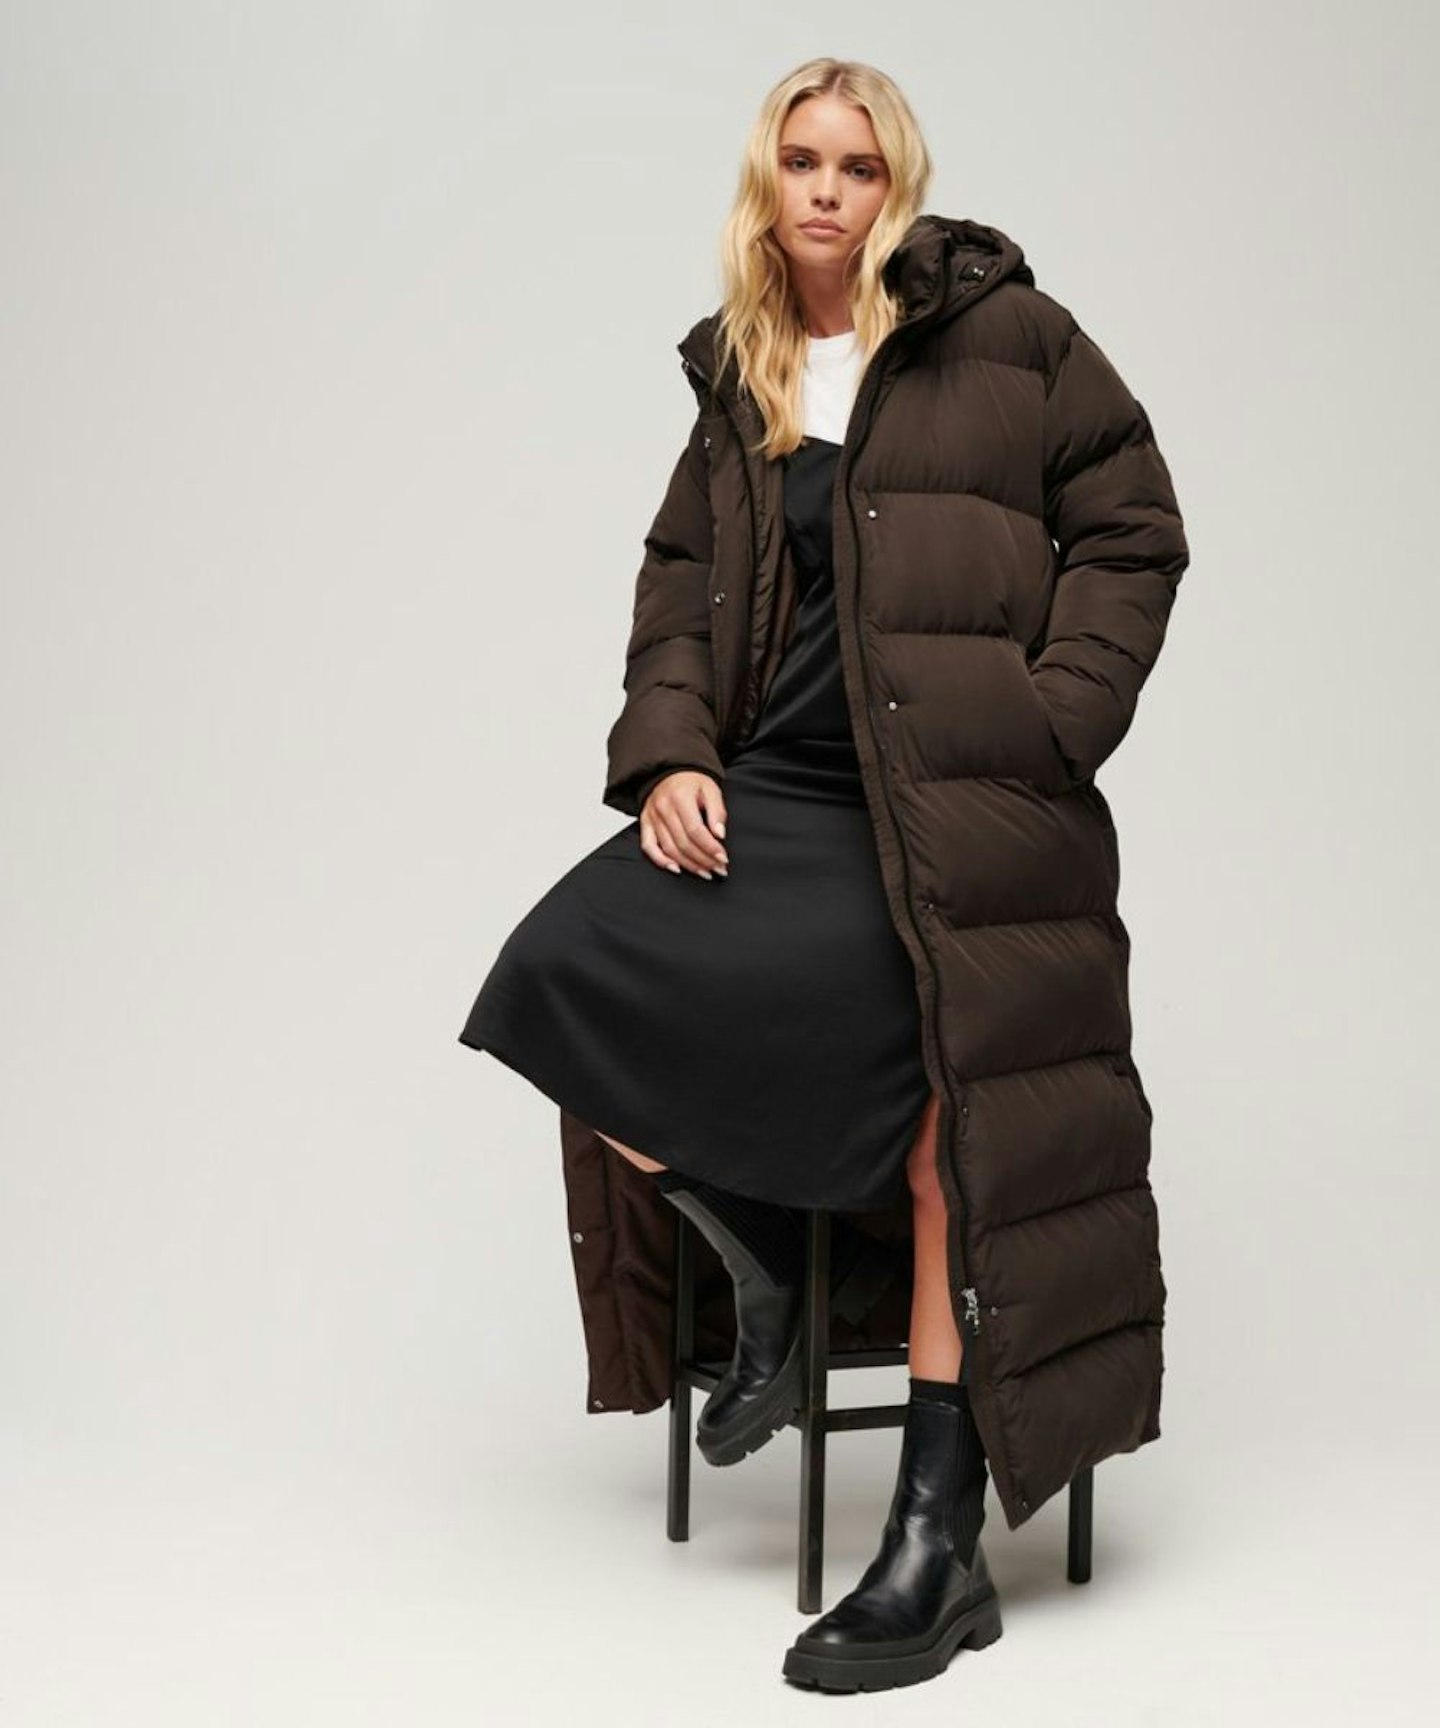 Maxi Hooded Puffer Coat, Superdry